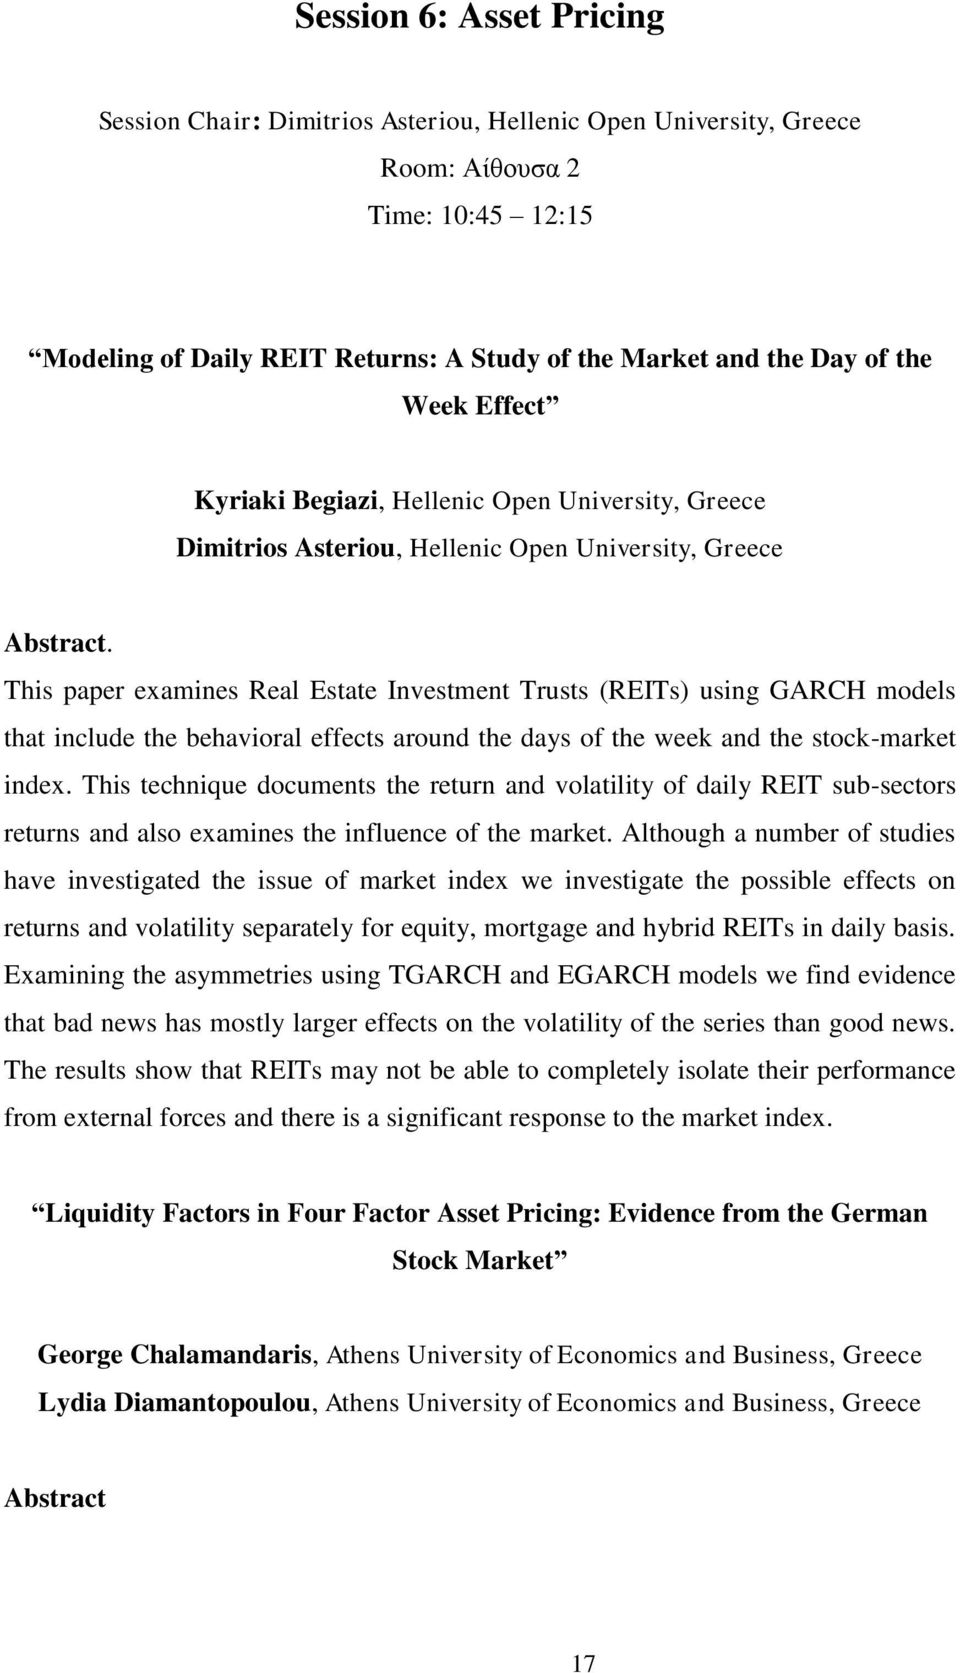 This paper examines Real Estate Investment Trusts (REITs) using GARCH models that include the behavioral effects around the days of the week and the stock-market index.